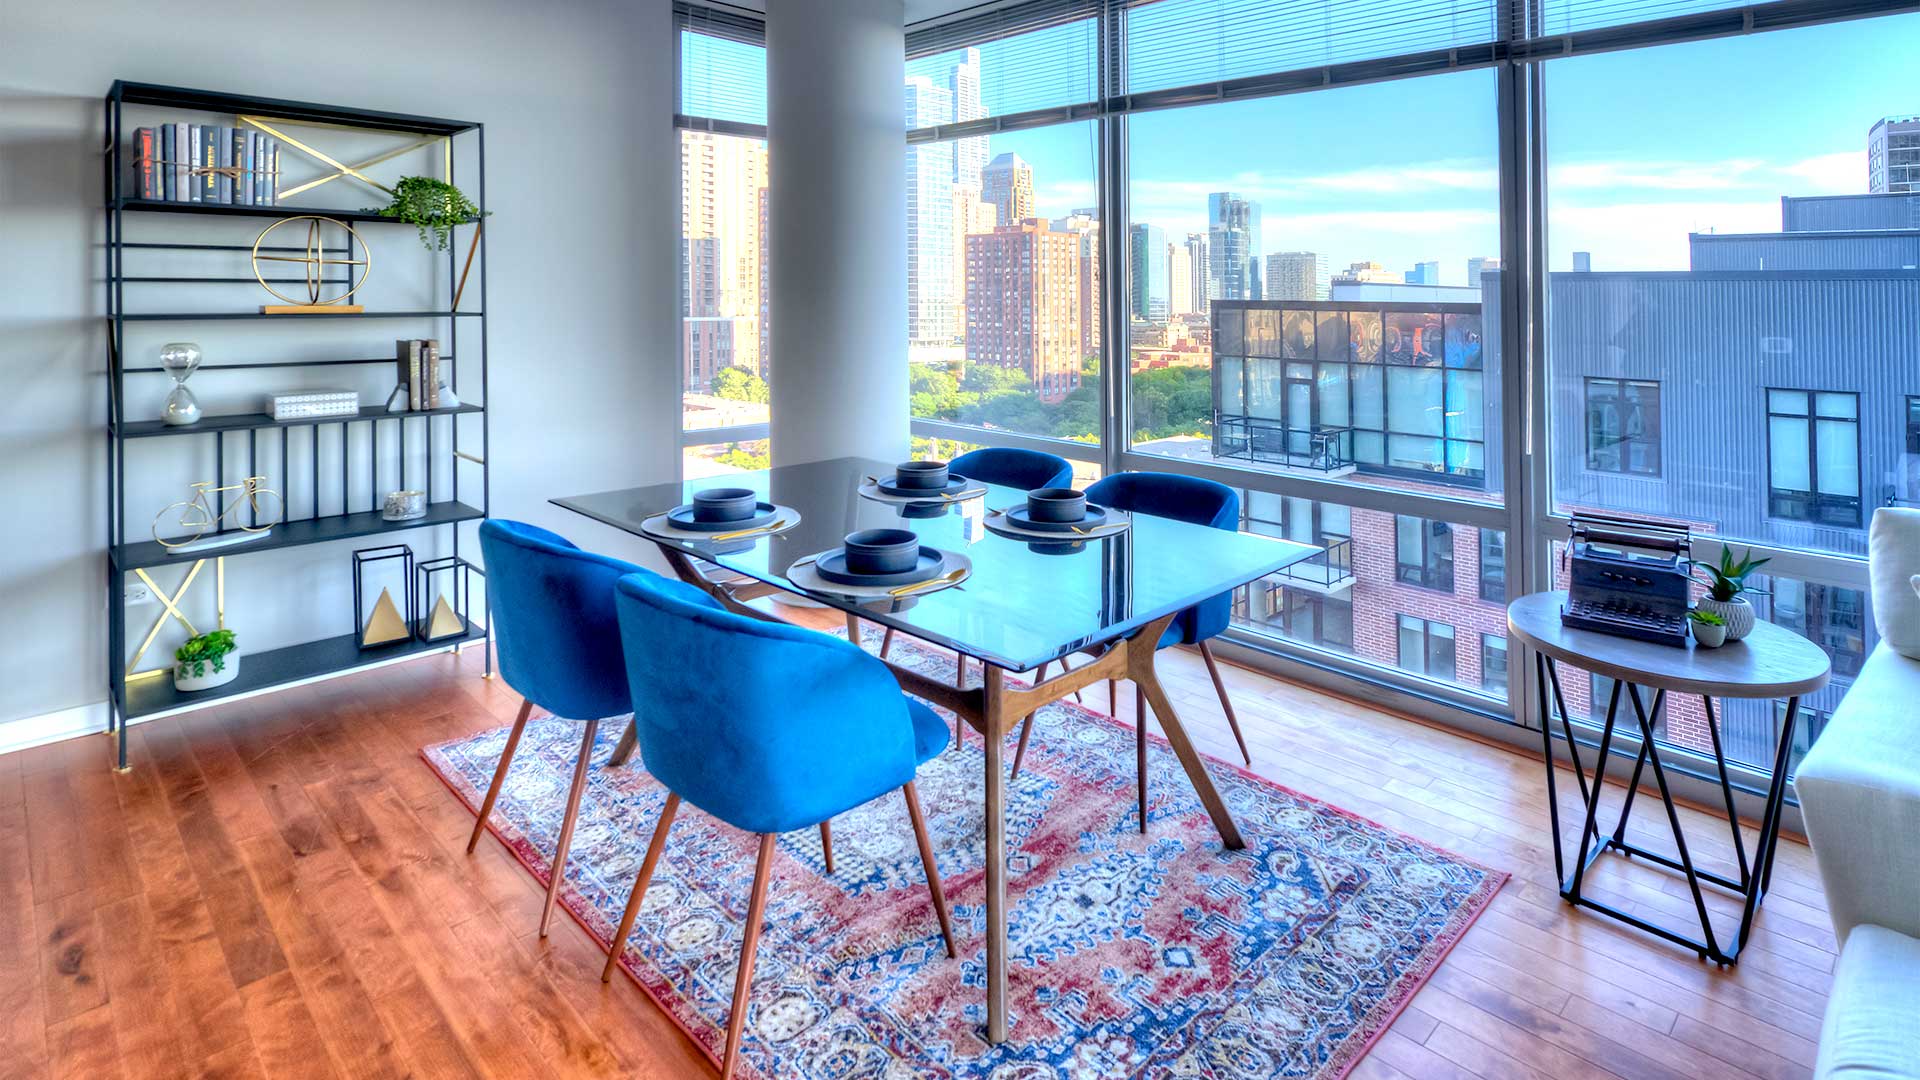 A glass-top dining set sits before floor-to-ceiling windows that show a number of Chicago buildings in the distance.